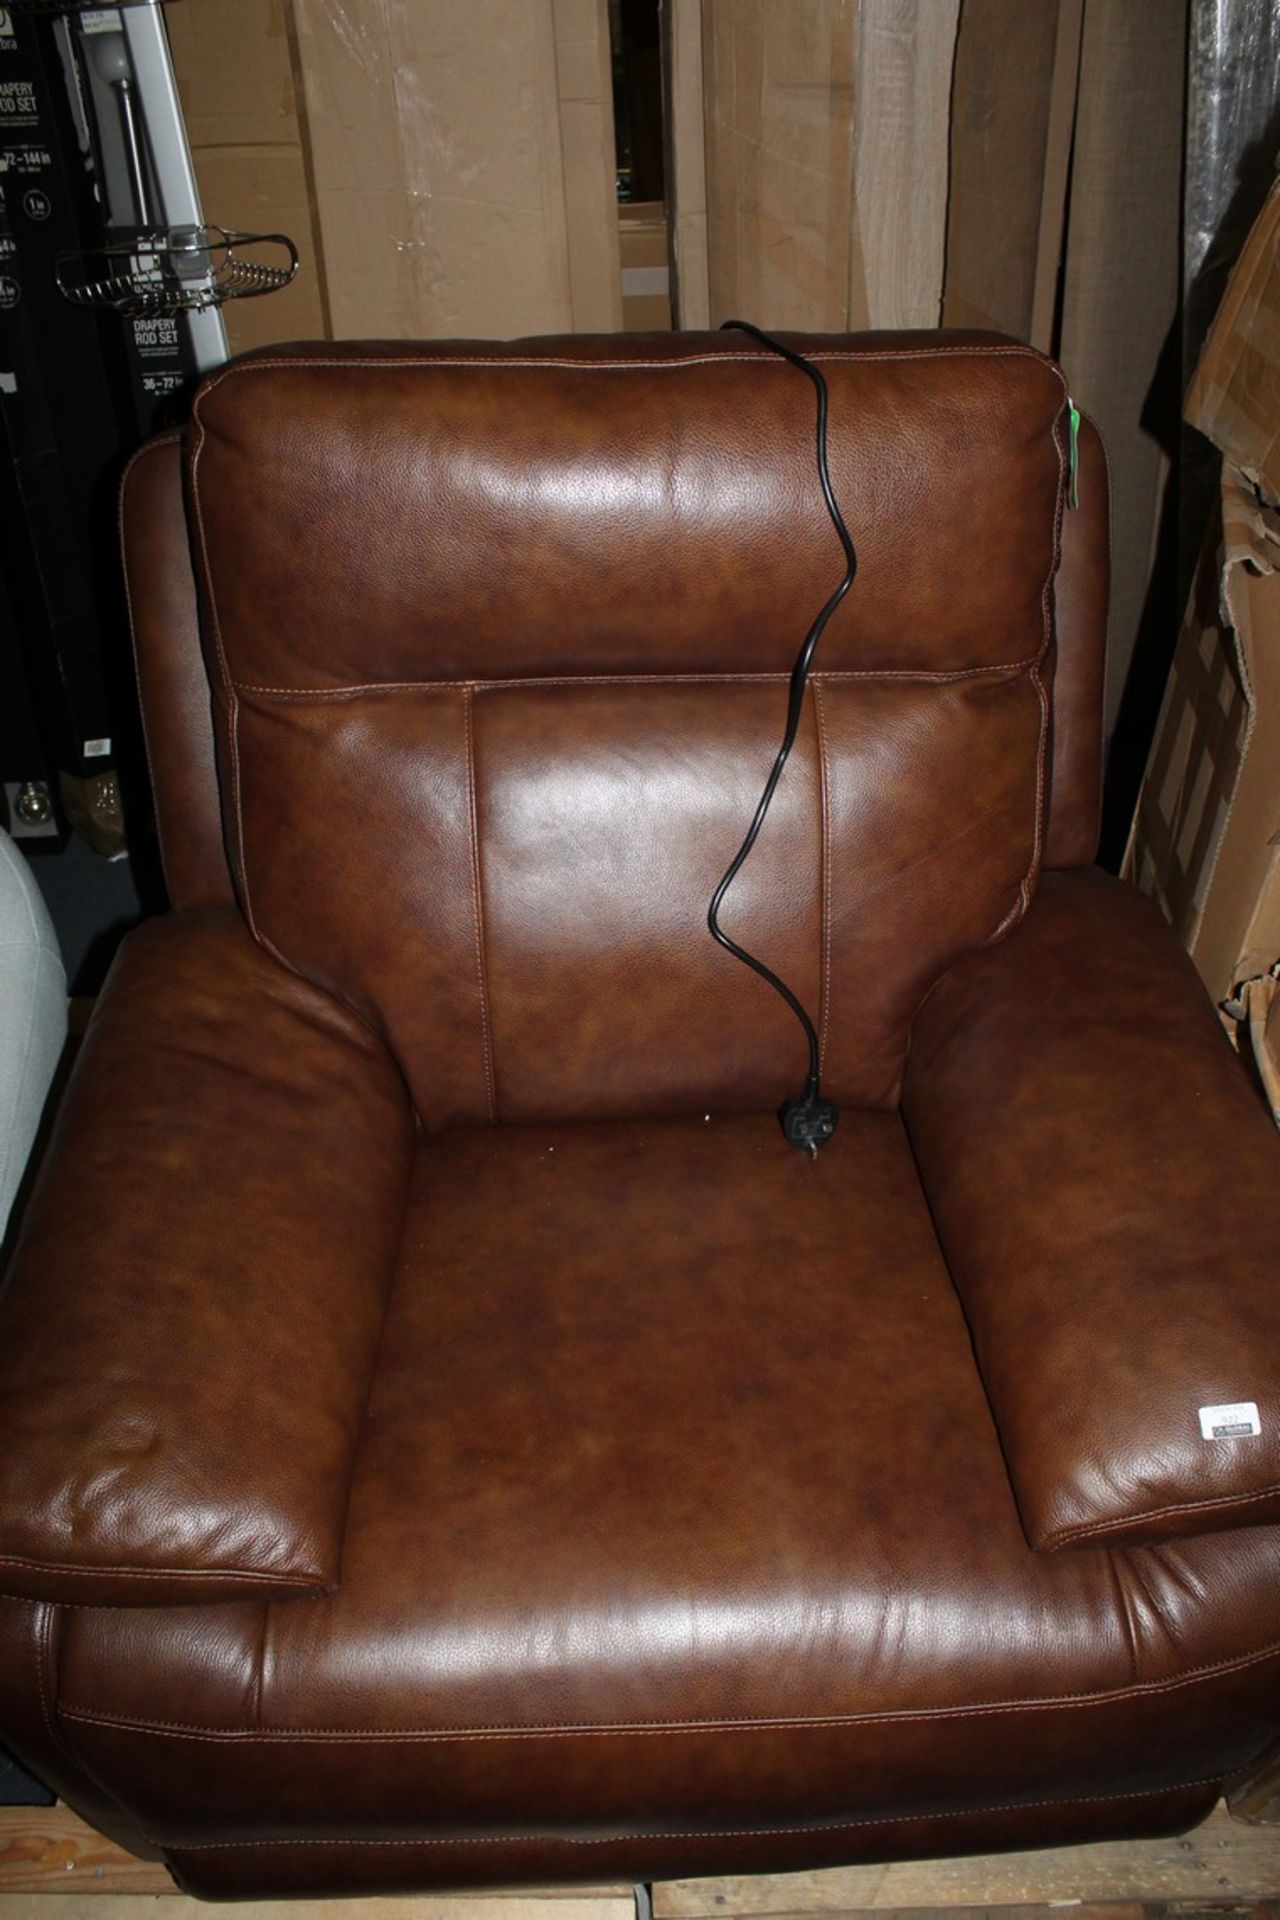 Boxed Brabas Divano Konyak Leather Electric Recliner Chair RRP £670 (16238) (Public Viewing and